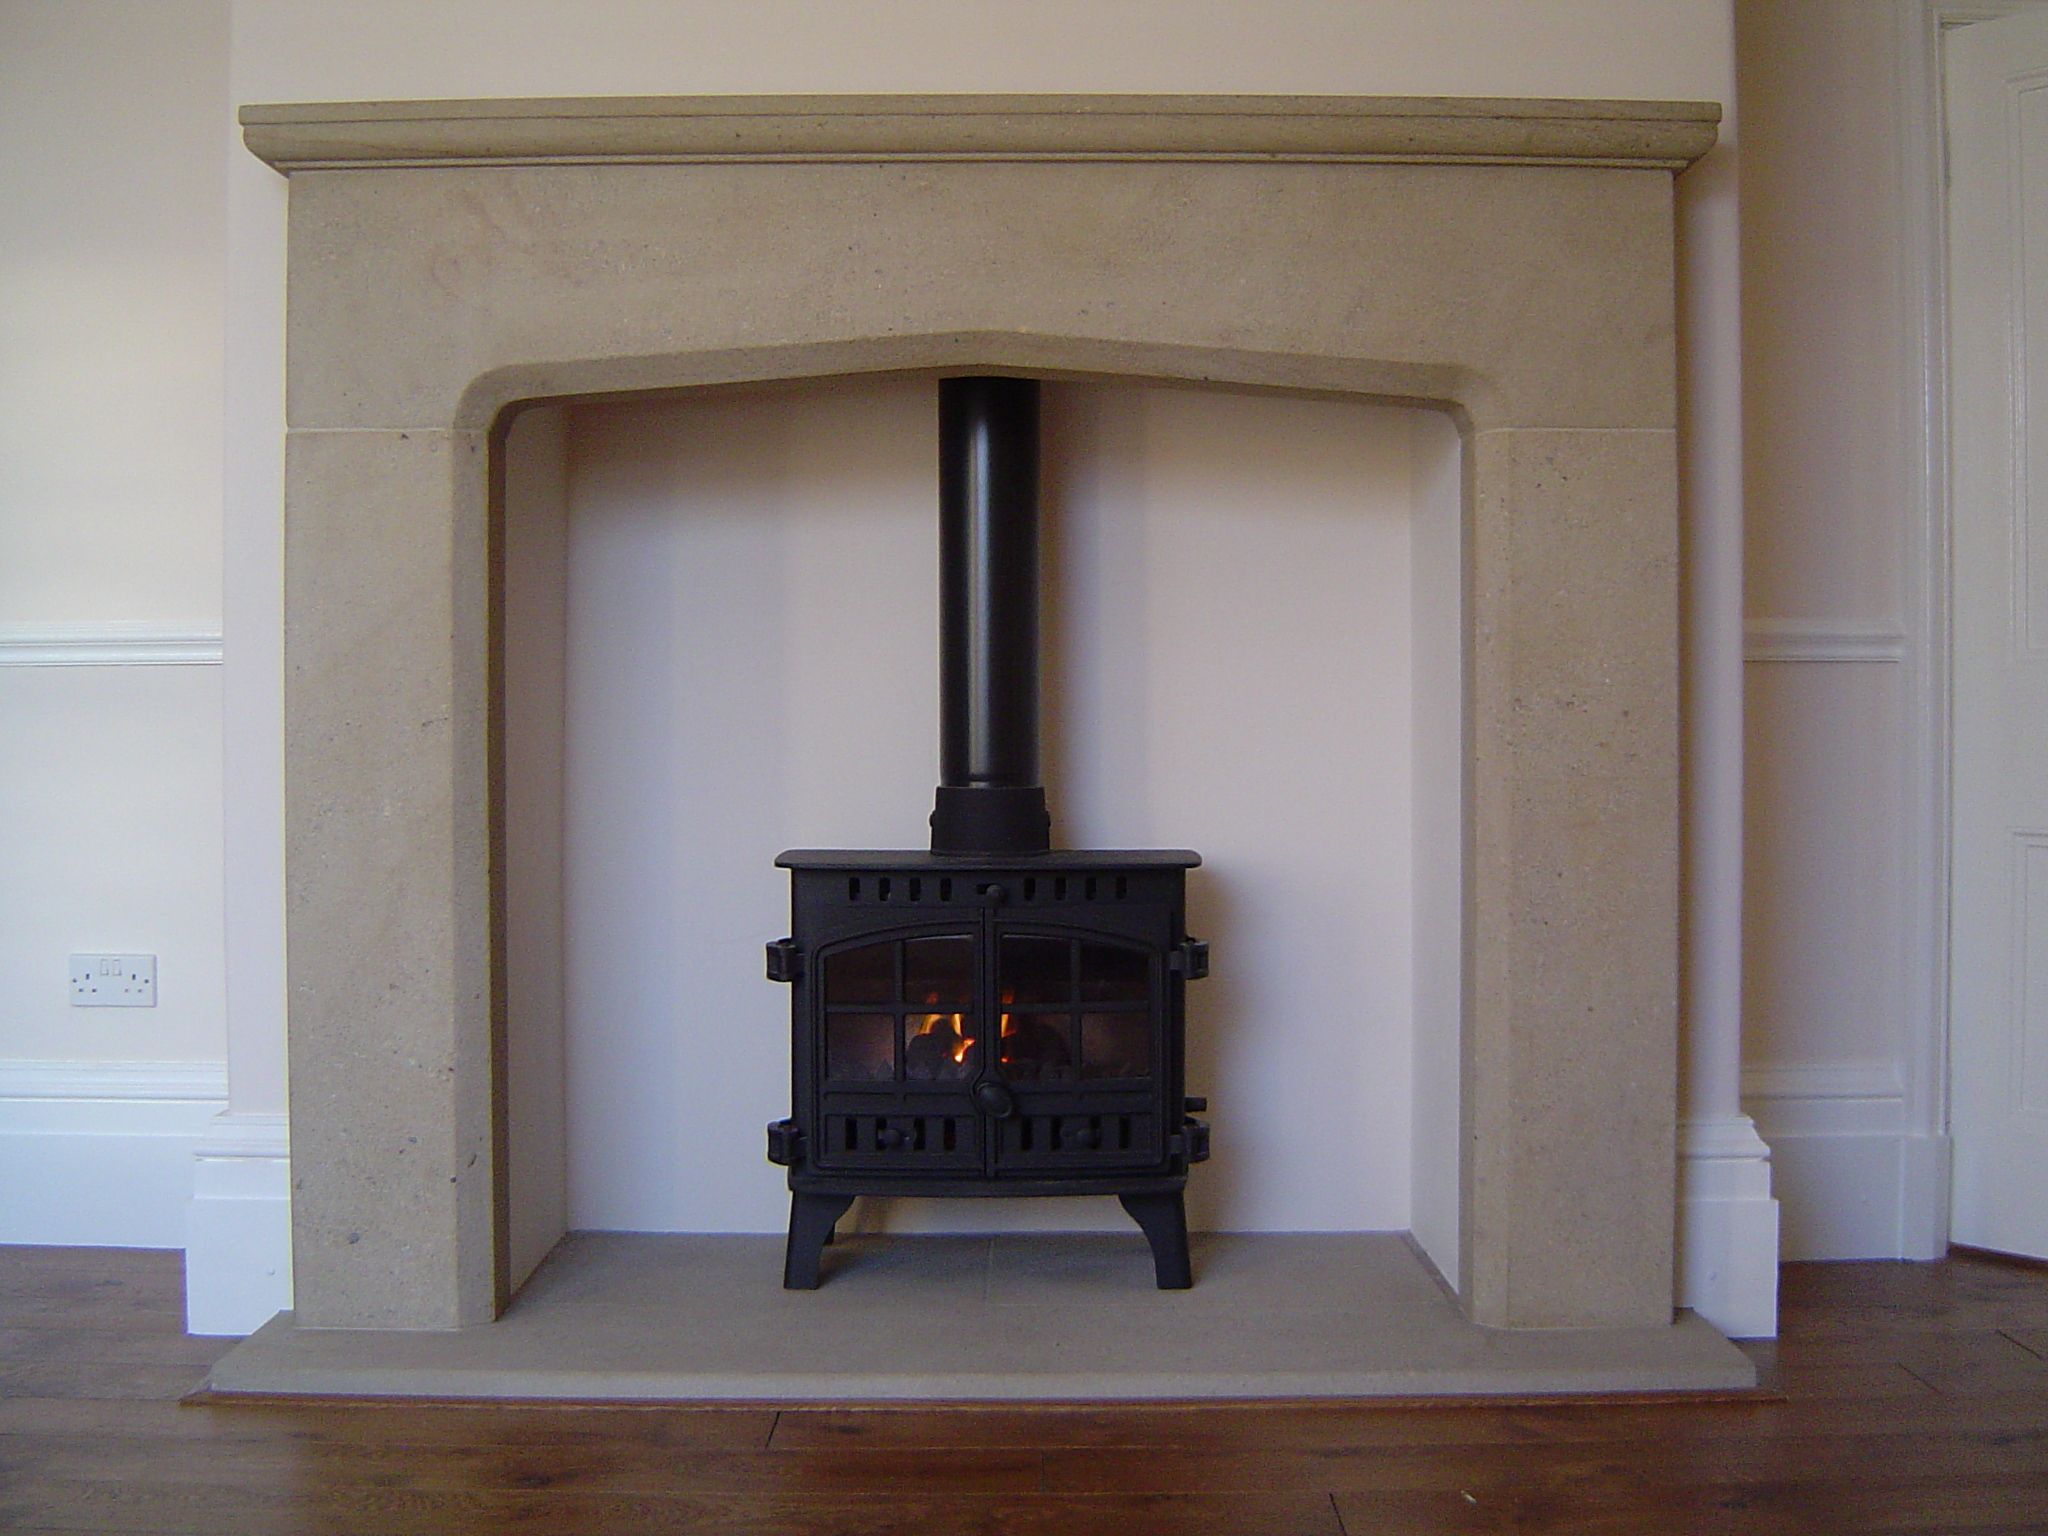 Grit stone fireplace surround Ormskirk